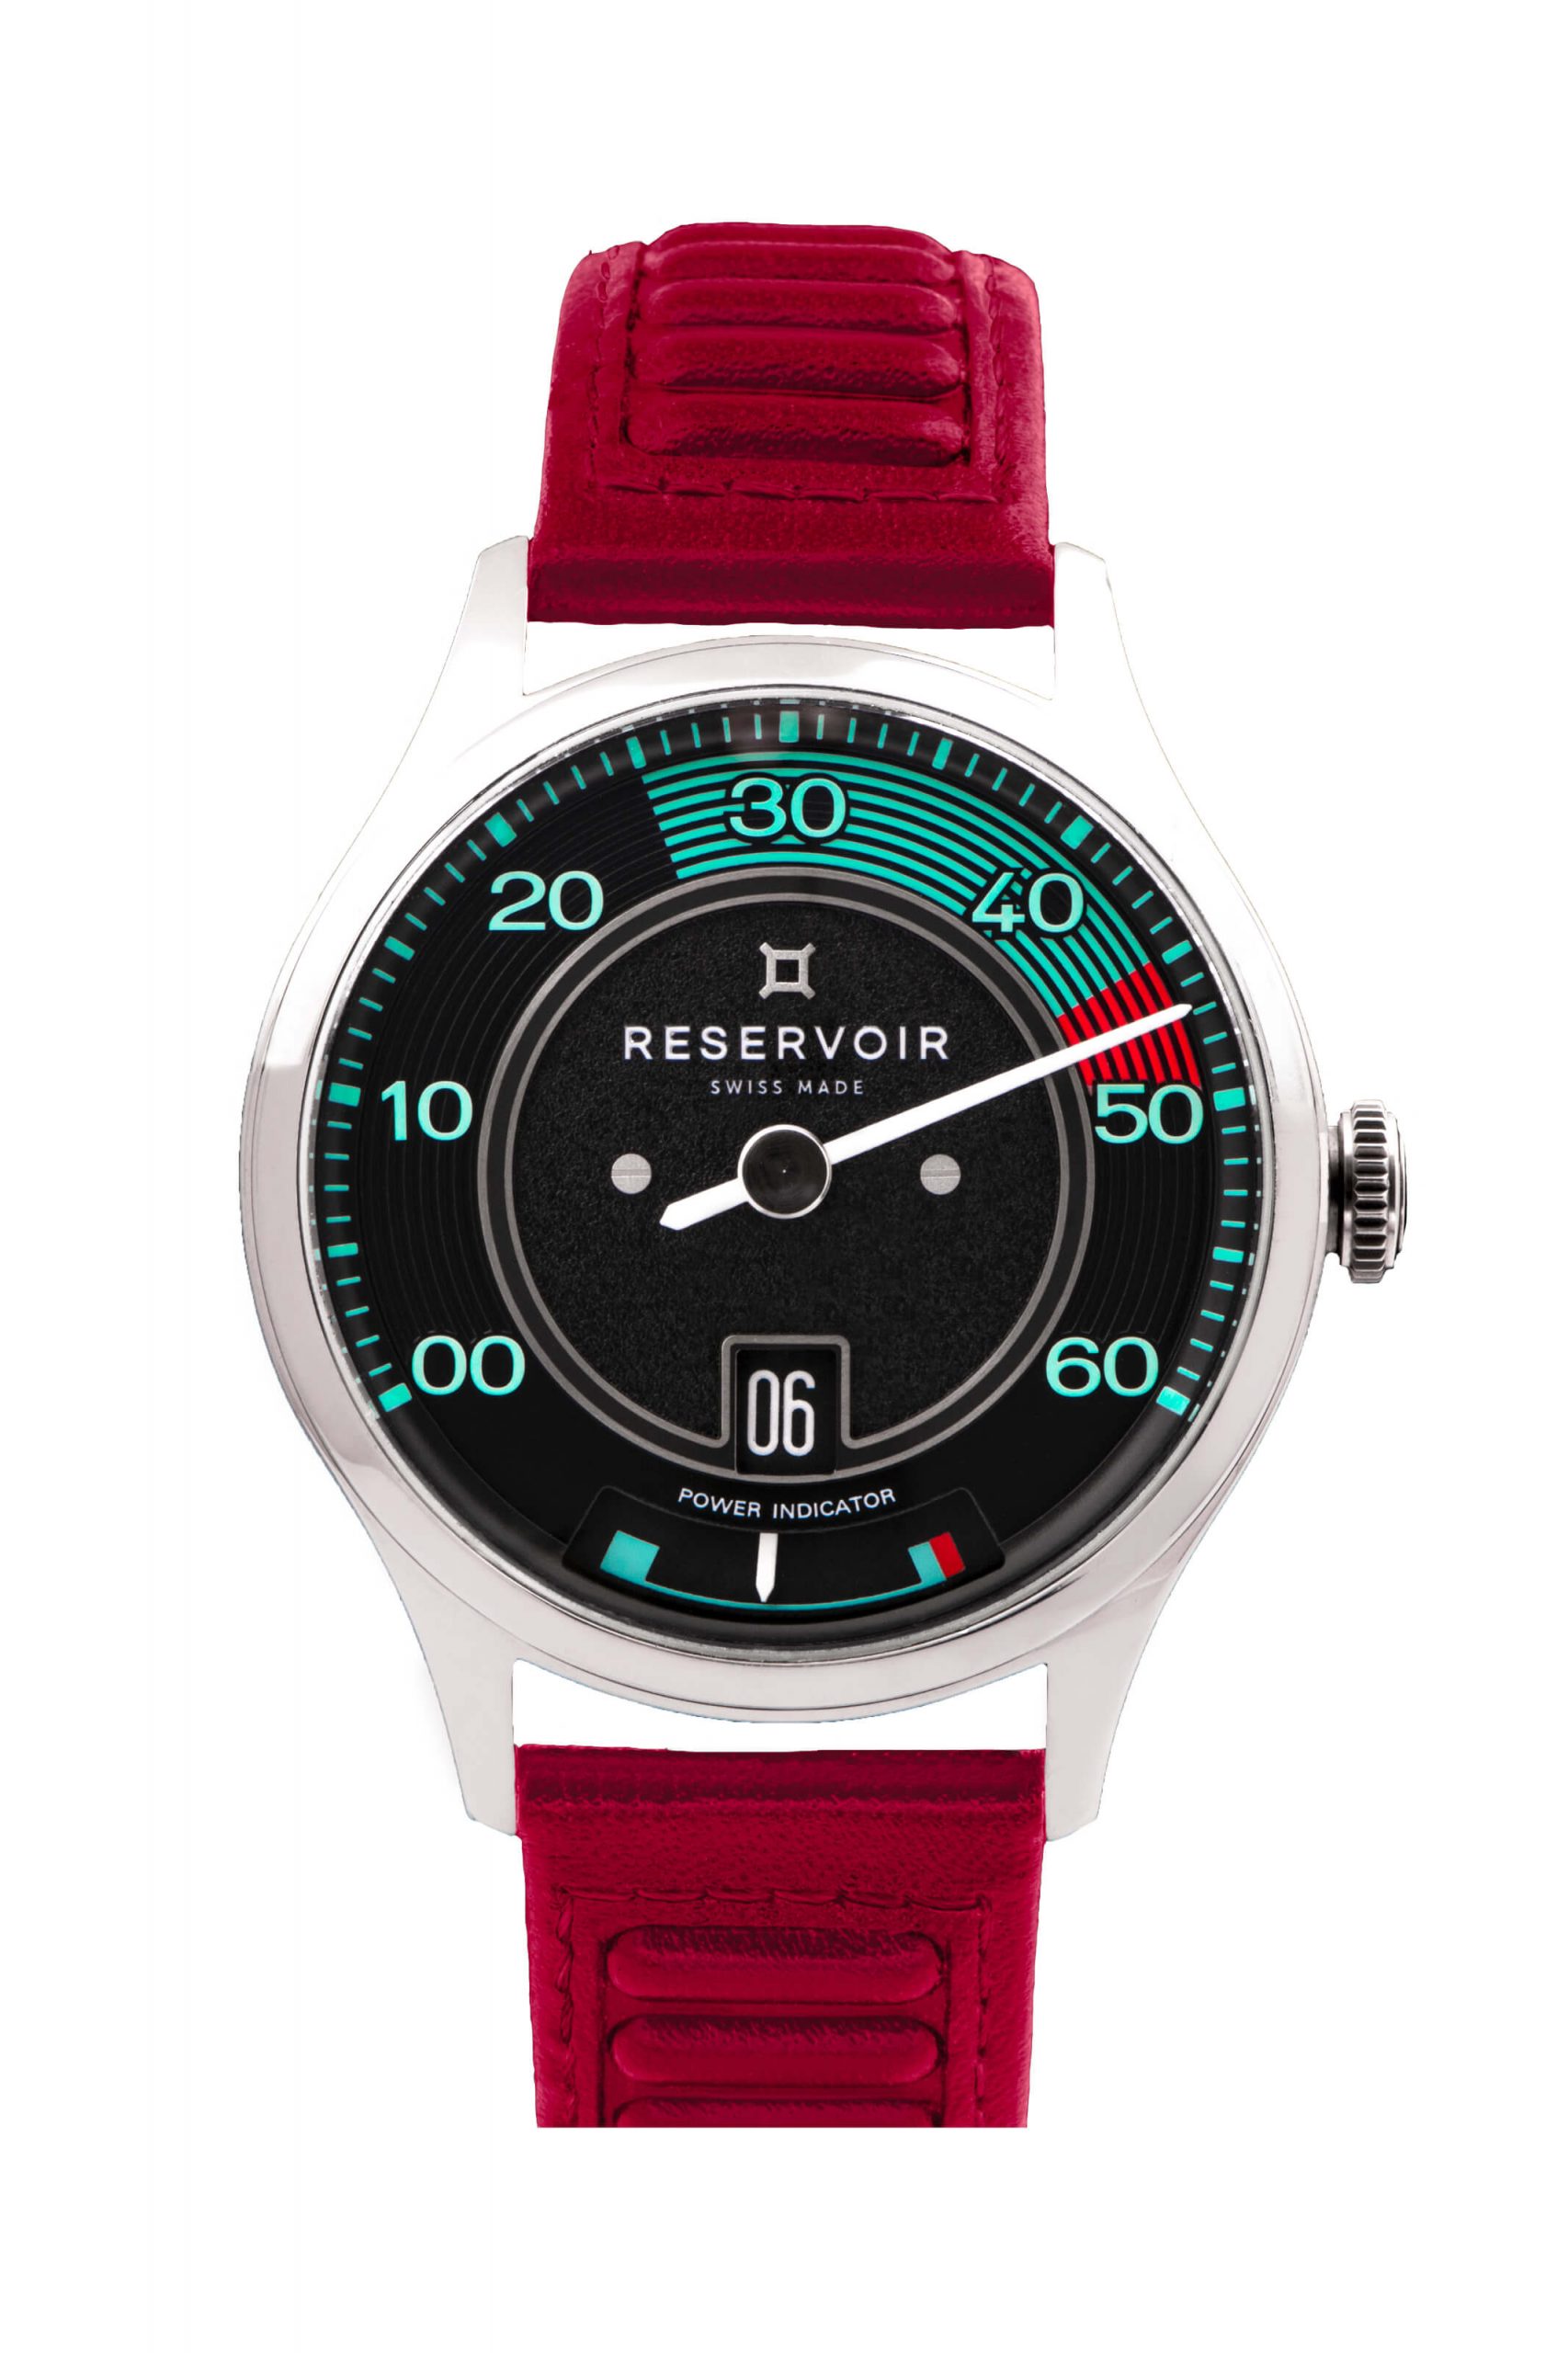 356 Porsche Luxury Car in Burgundy, Light Pink, and Light Teal with Matching Watch